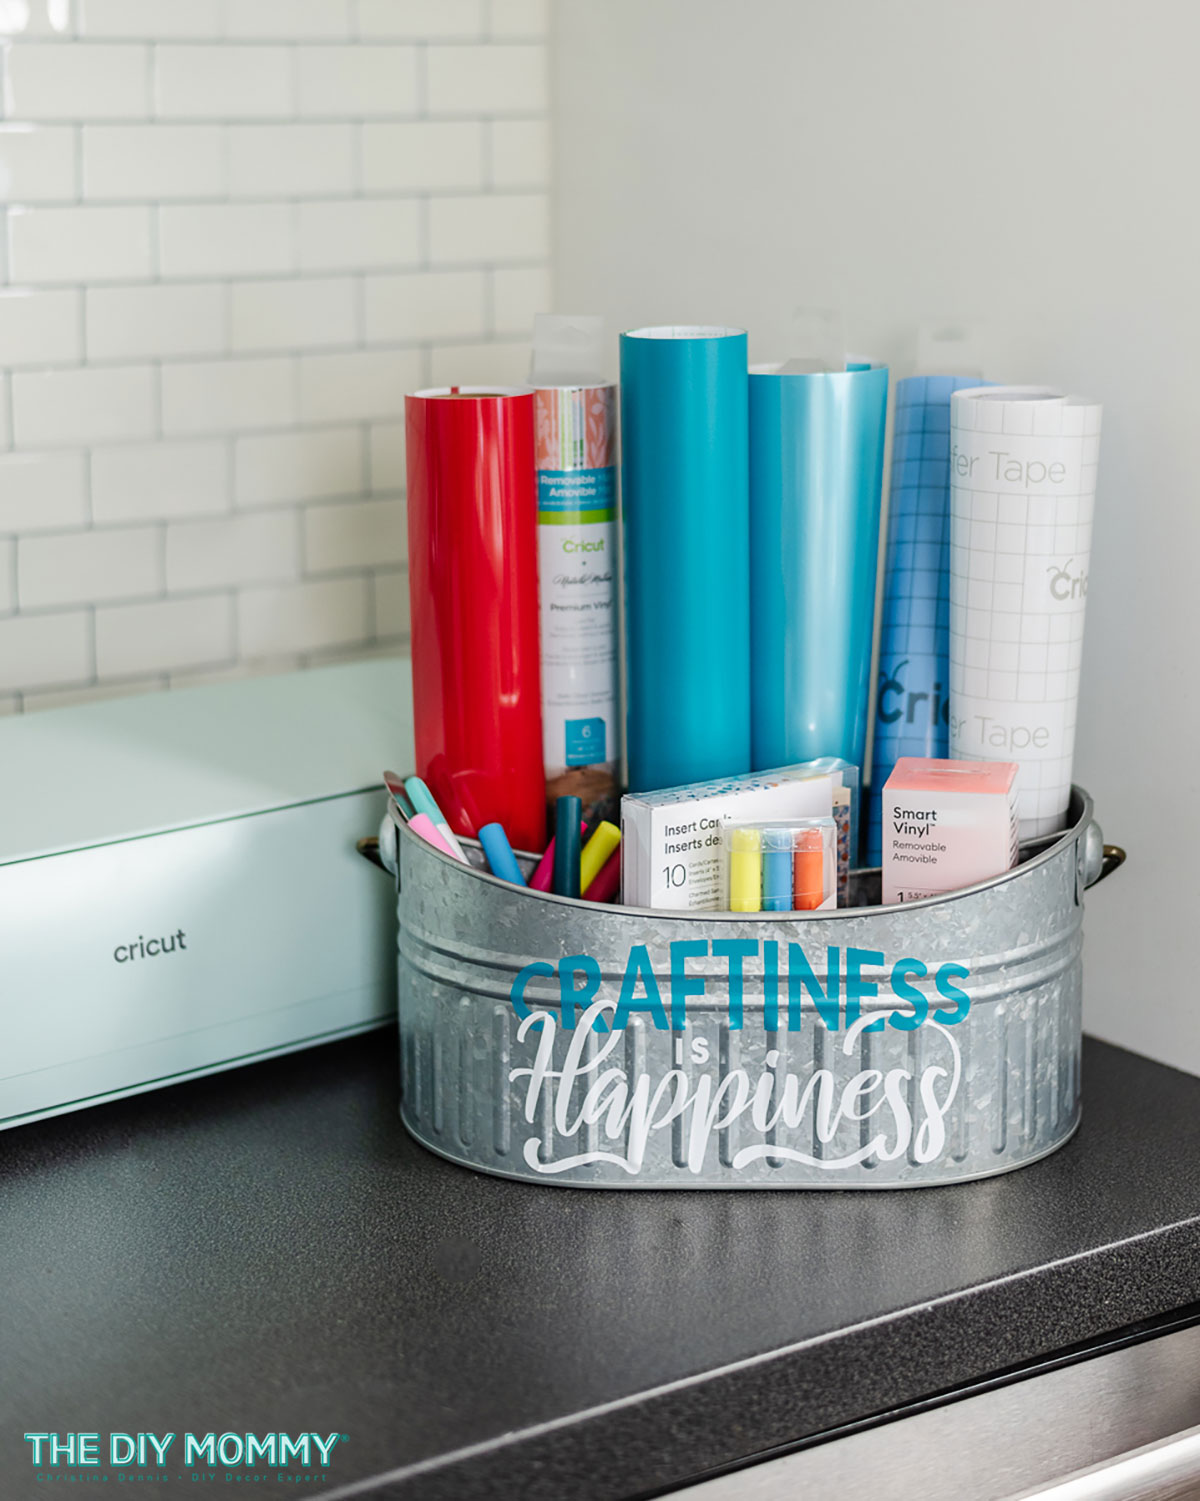 A cute little galvanized craft caddy with a custom decal reading "craftiness is happiness' full of art supplies.
